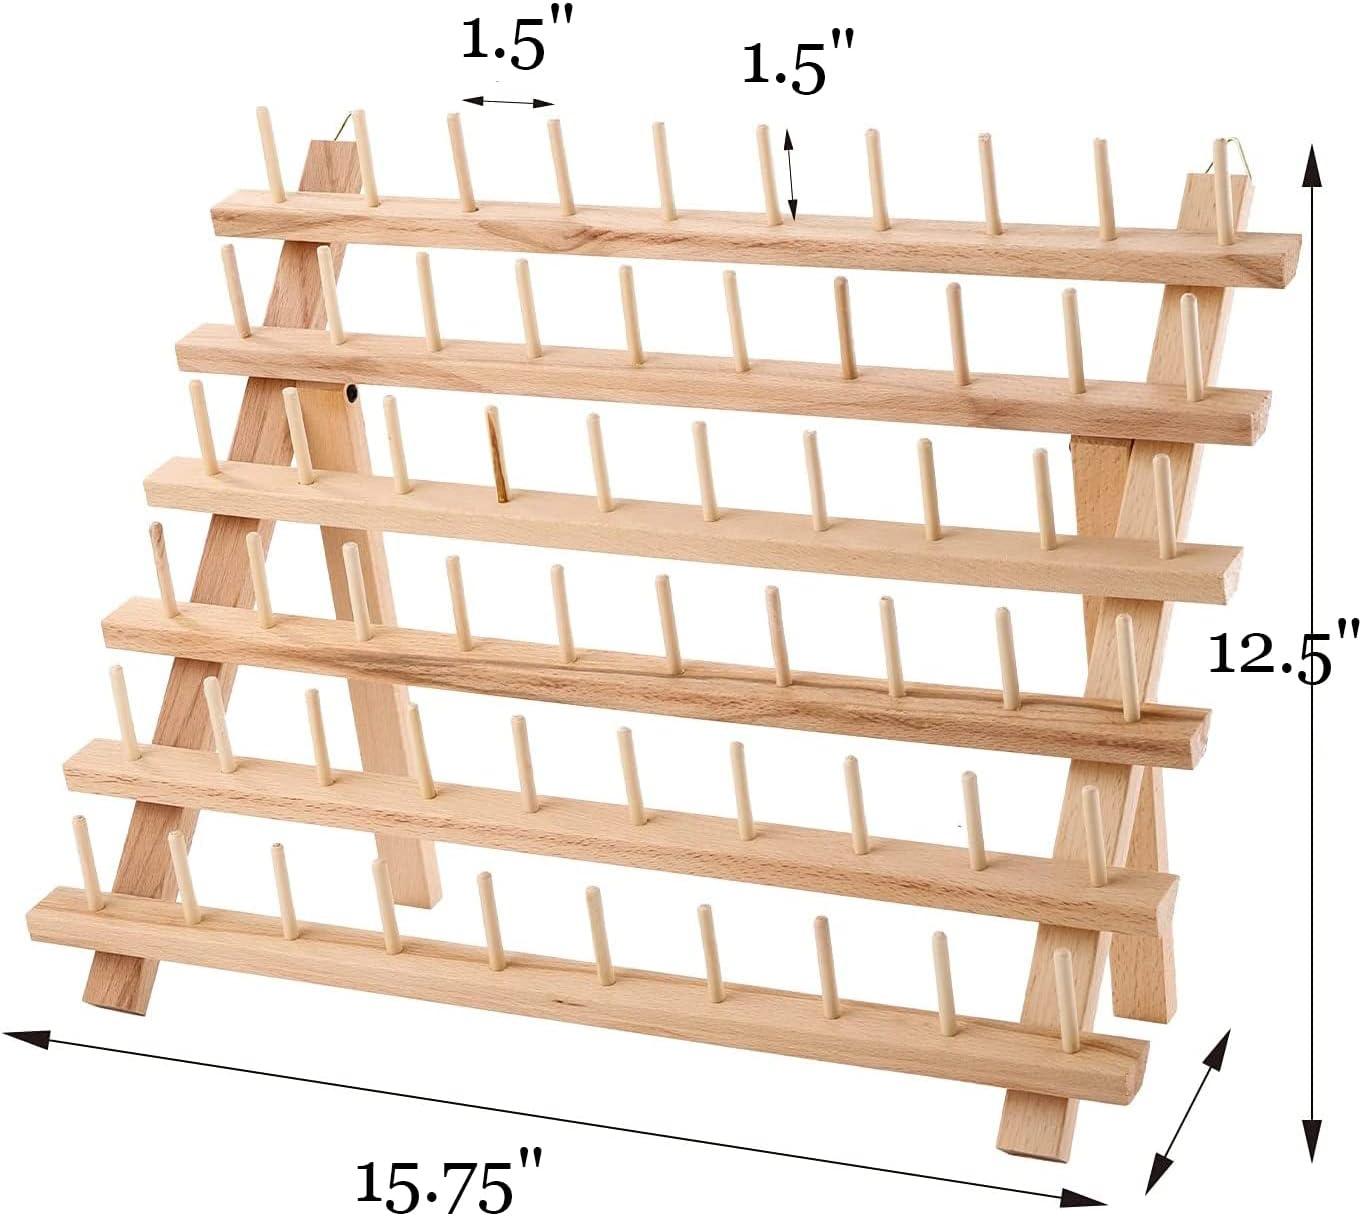 Thread Rack with 60 pegs for spools & cones